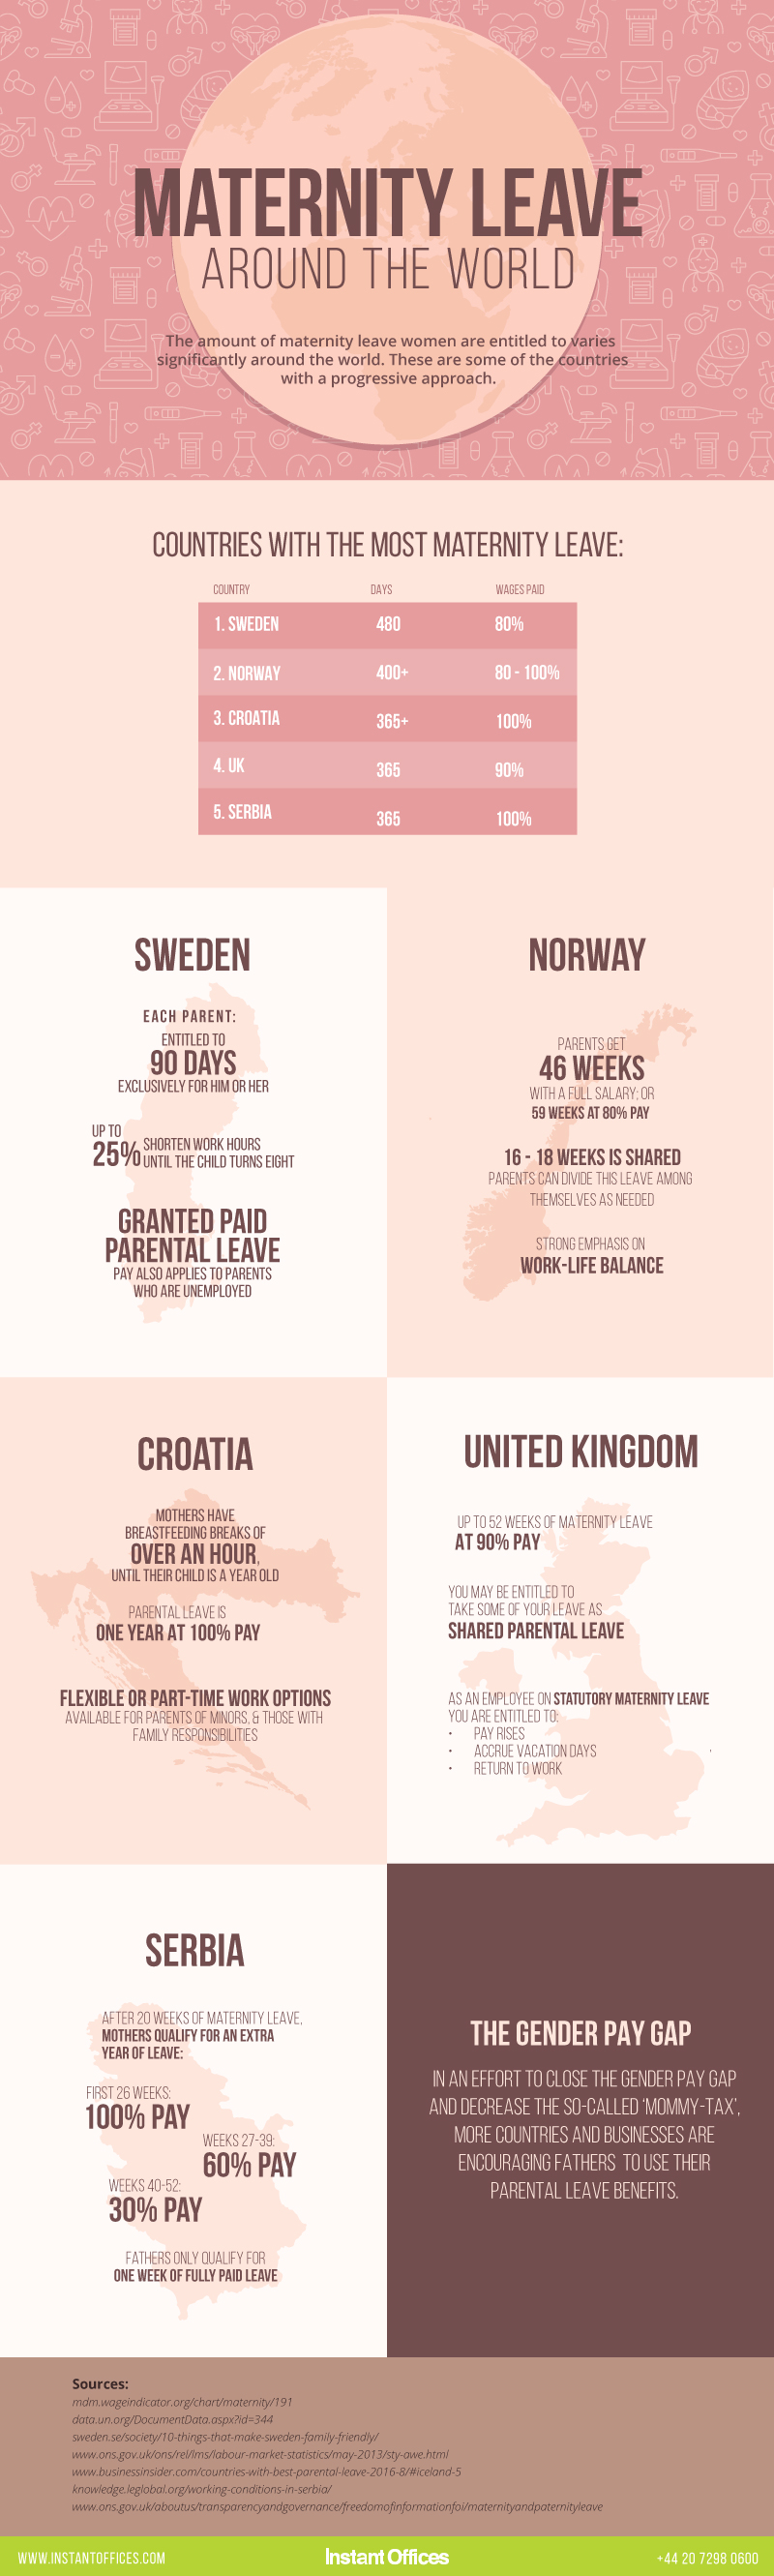 Maternity Leave Around the World - Instant Offices